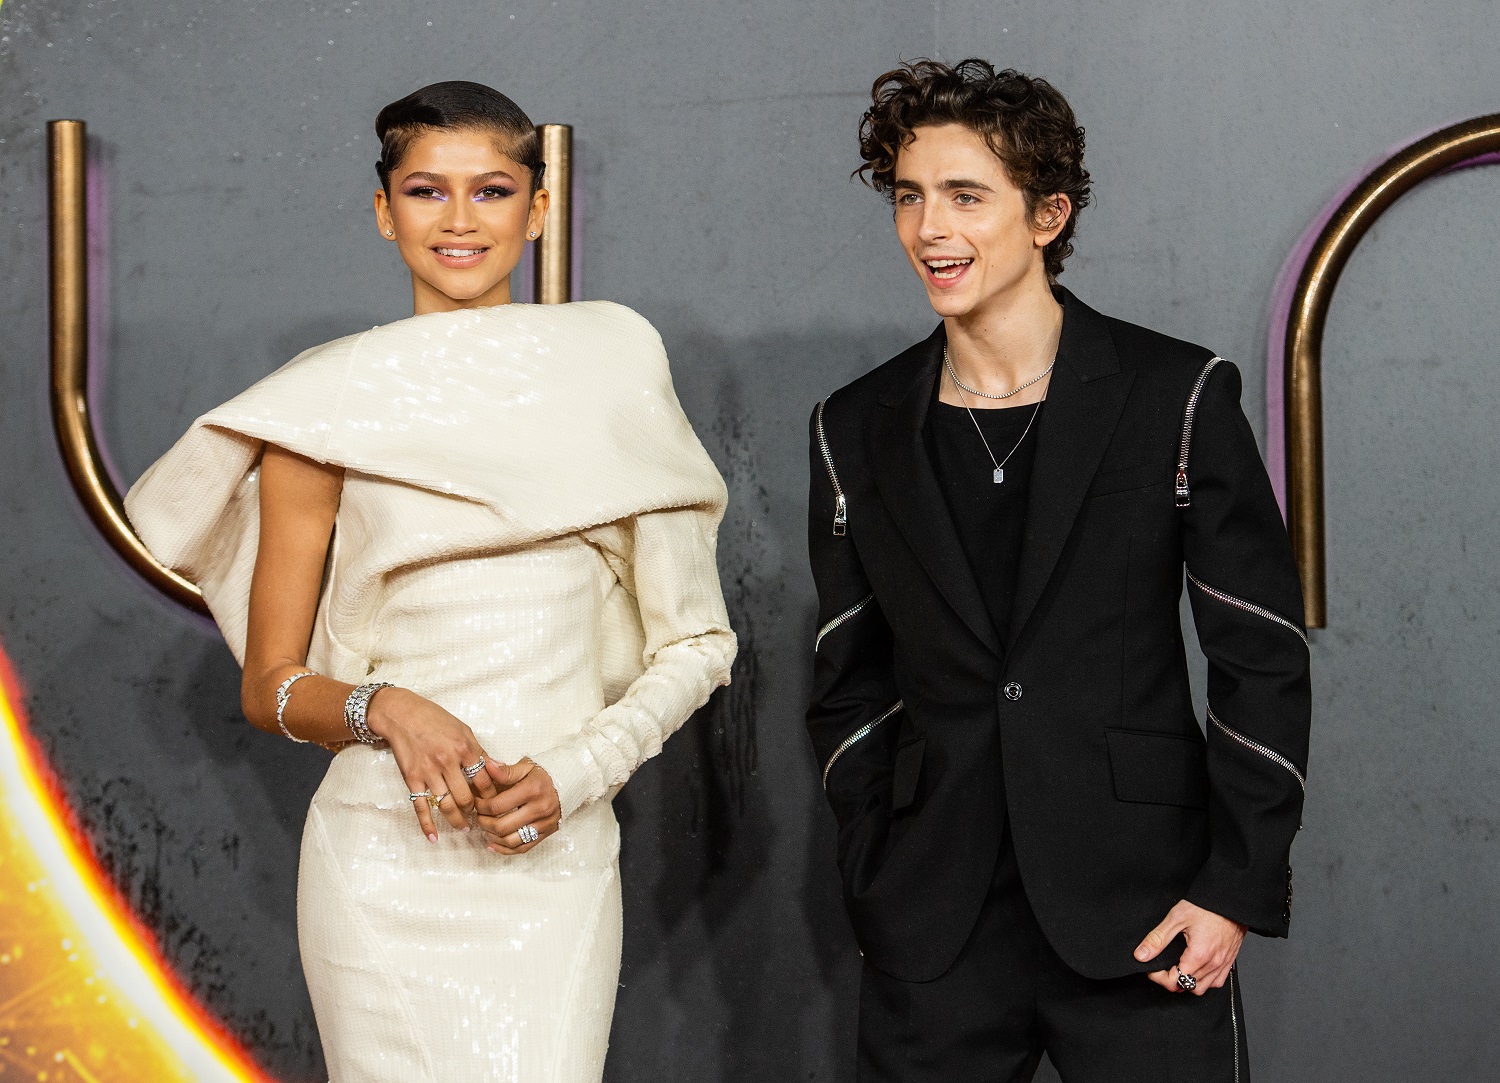 Zendaya and Timothée Chalamet attend the "Dune" UK Special Screening at Odeon Luxe Leicester Square on October 18, 2021 in London, England.